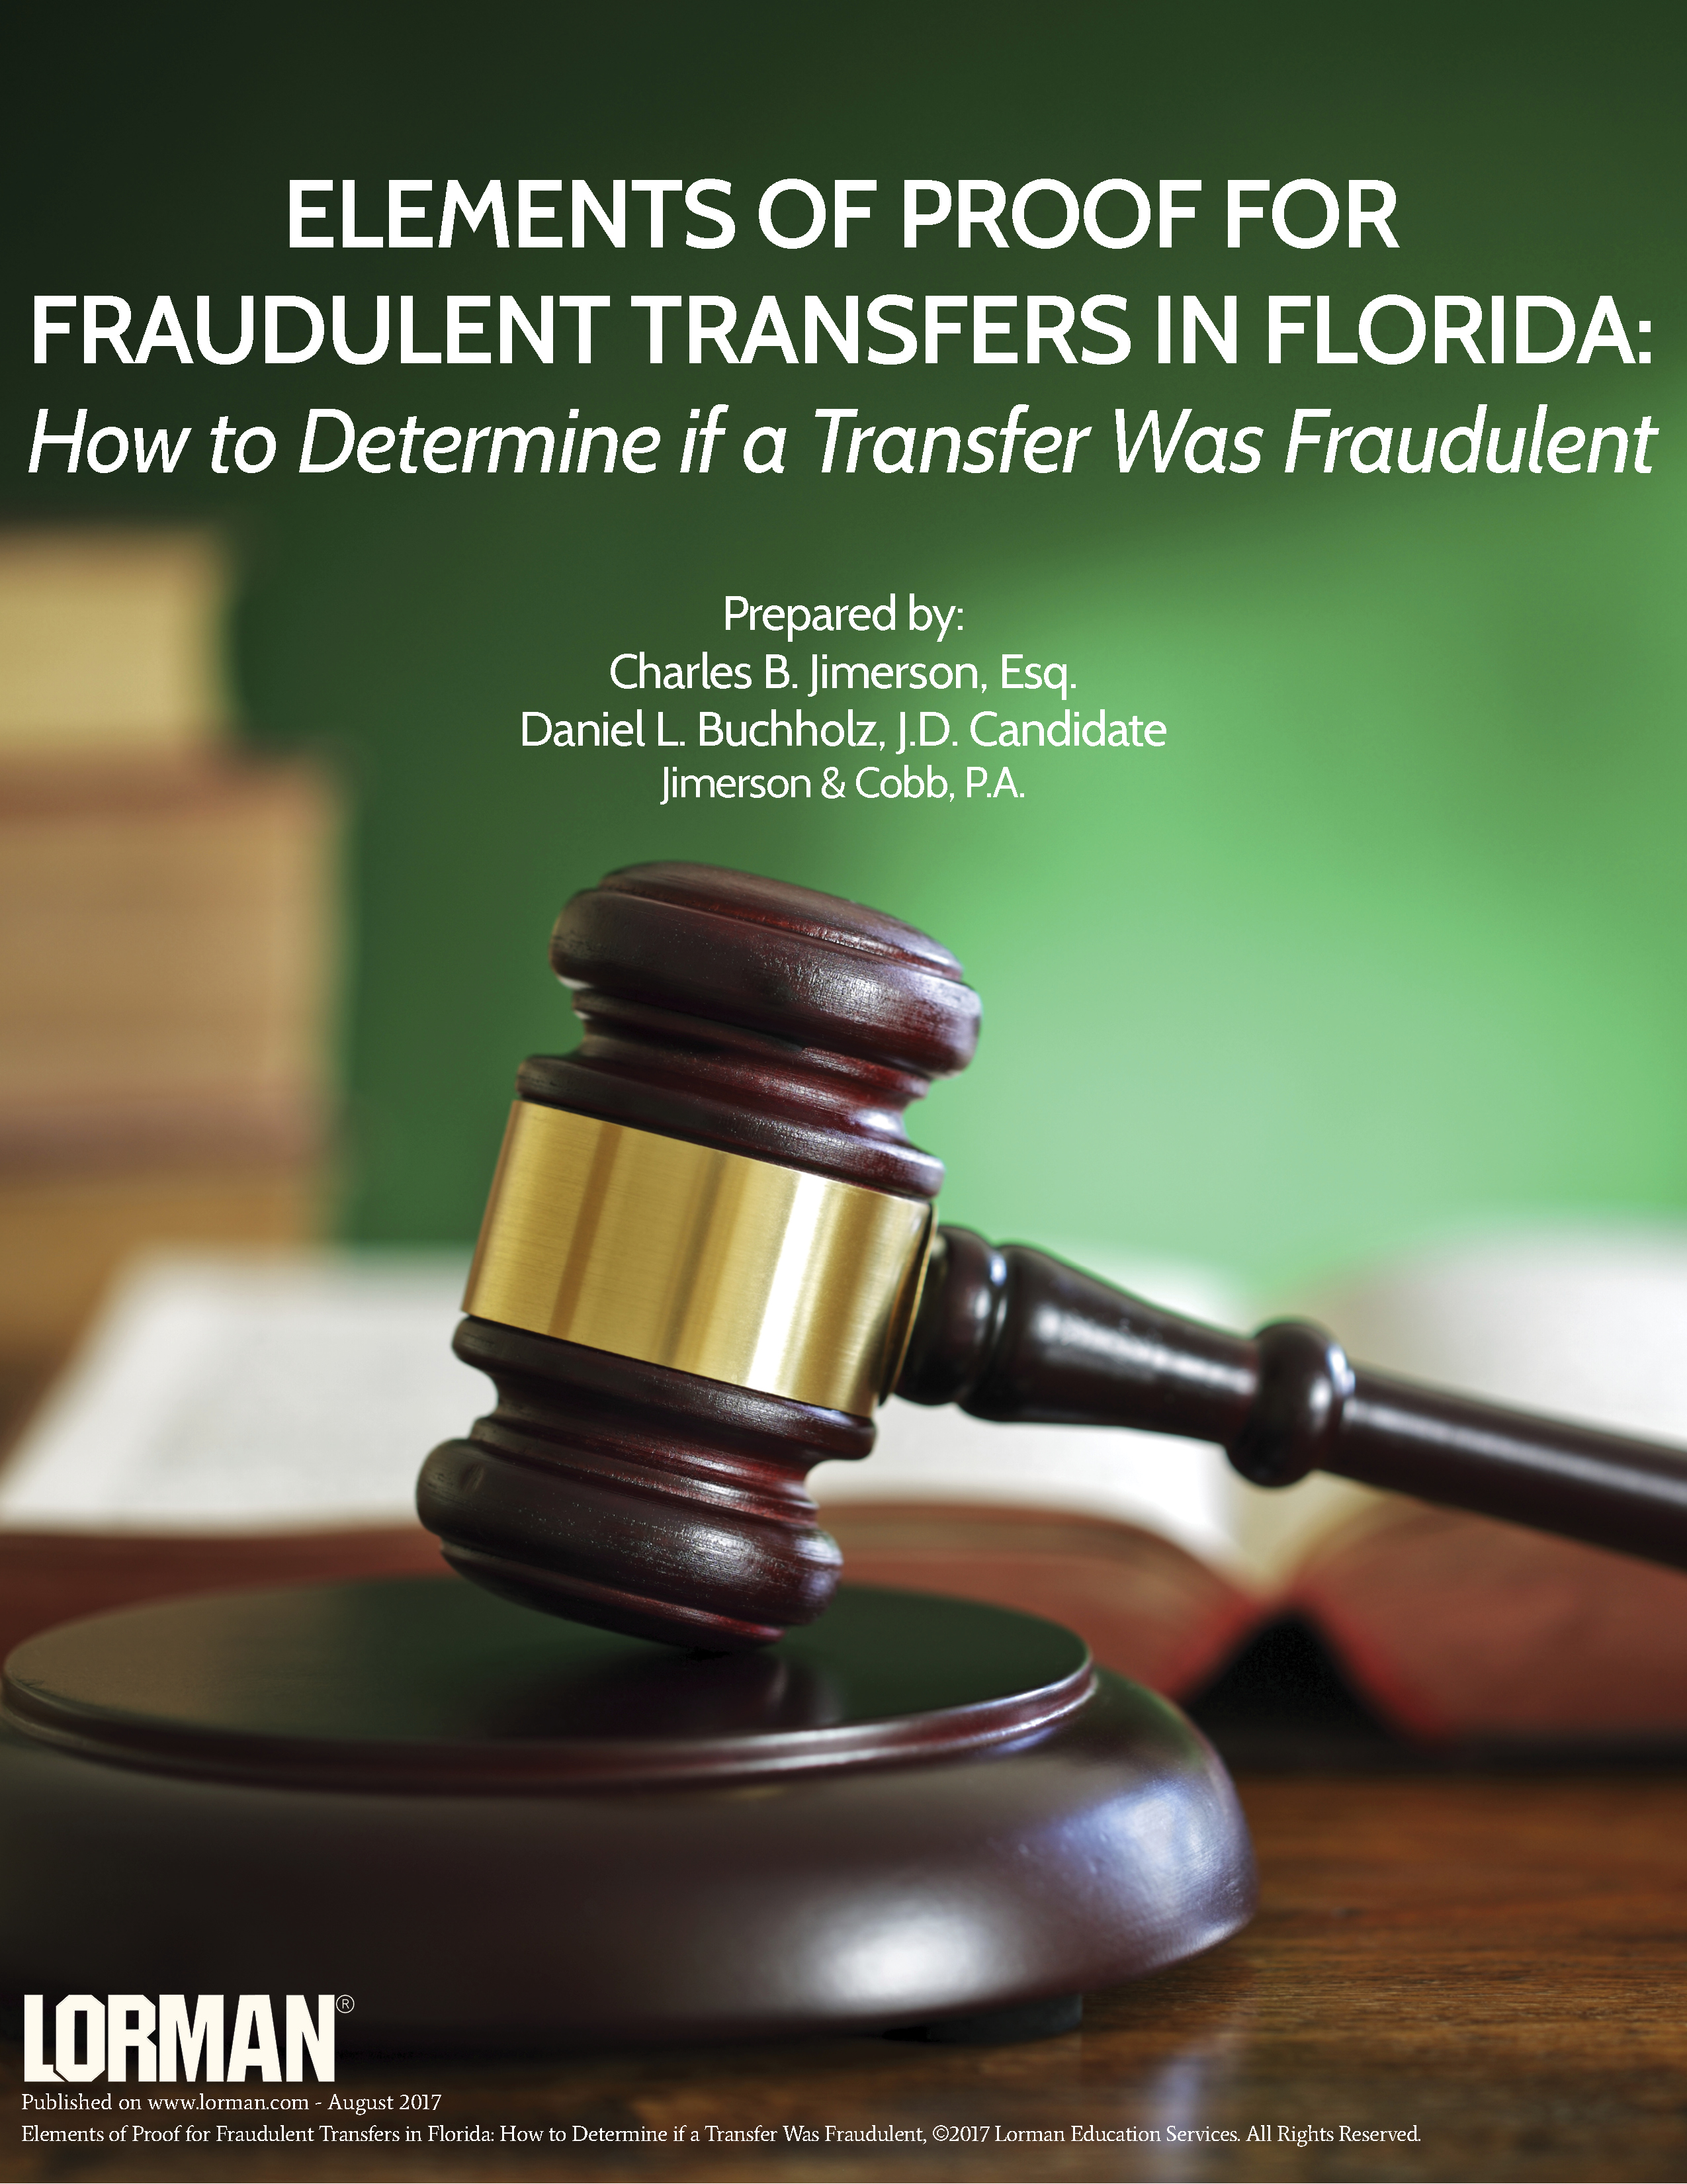 Elements of Proof for Fraudulent Transfers in Florida: Determine if a Transfer Was Fraudulent